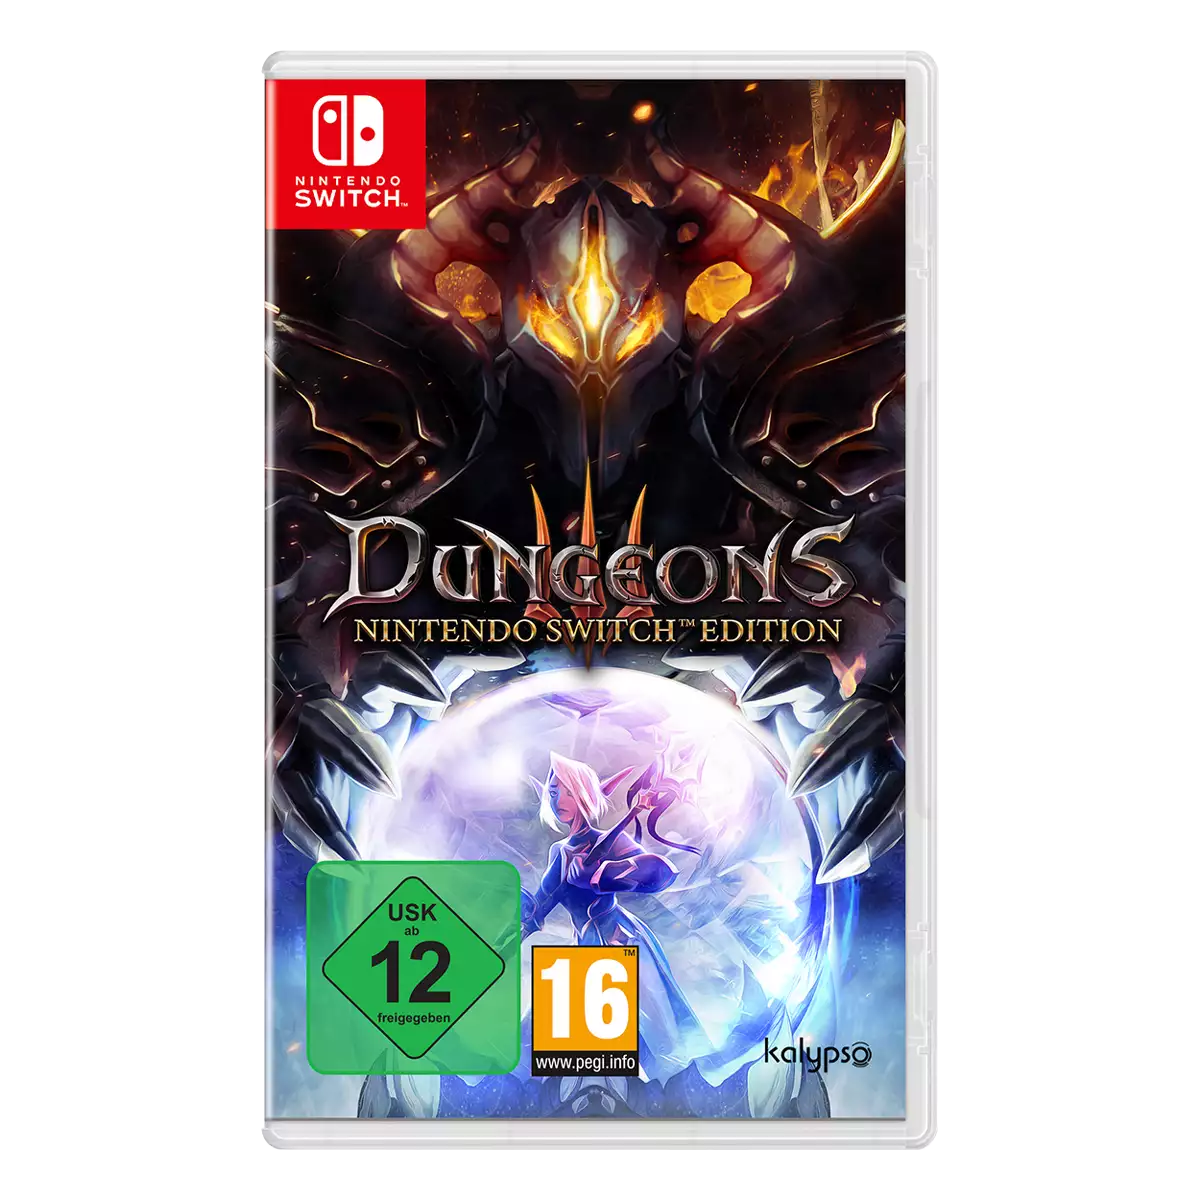 Dungeons 3 - Nintendo Switch Edition (Switch) Cover